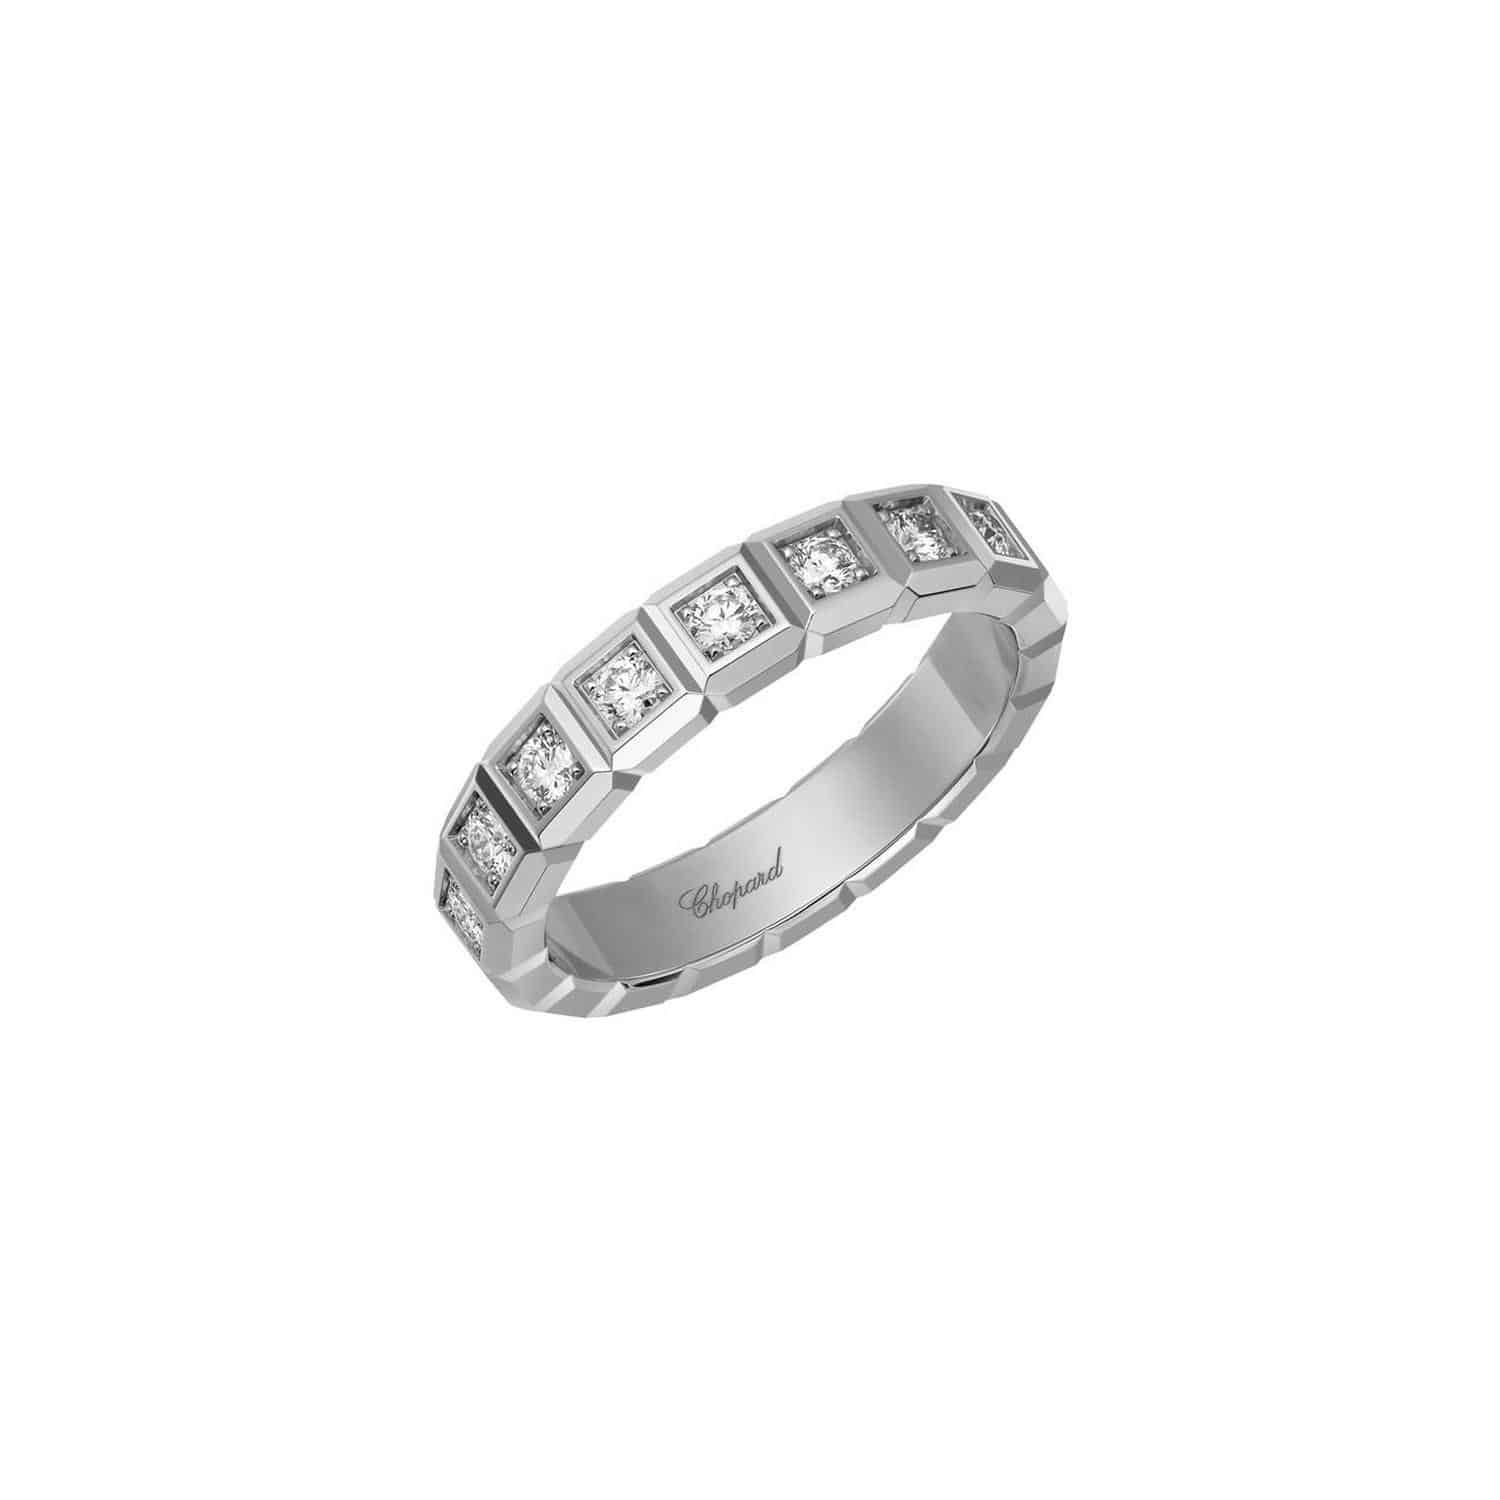 CHOPARD RING ICE CUBE - 829834-1040